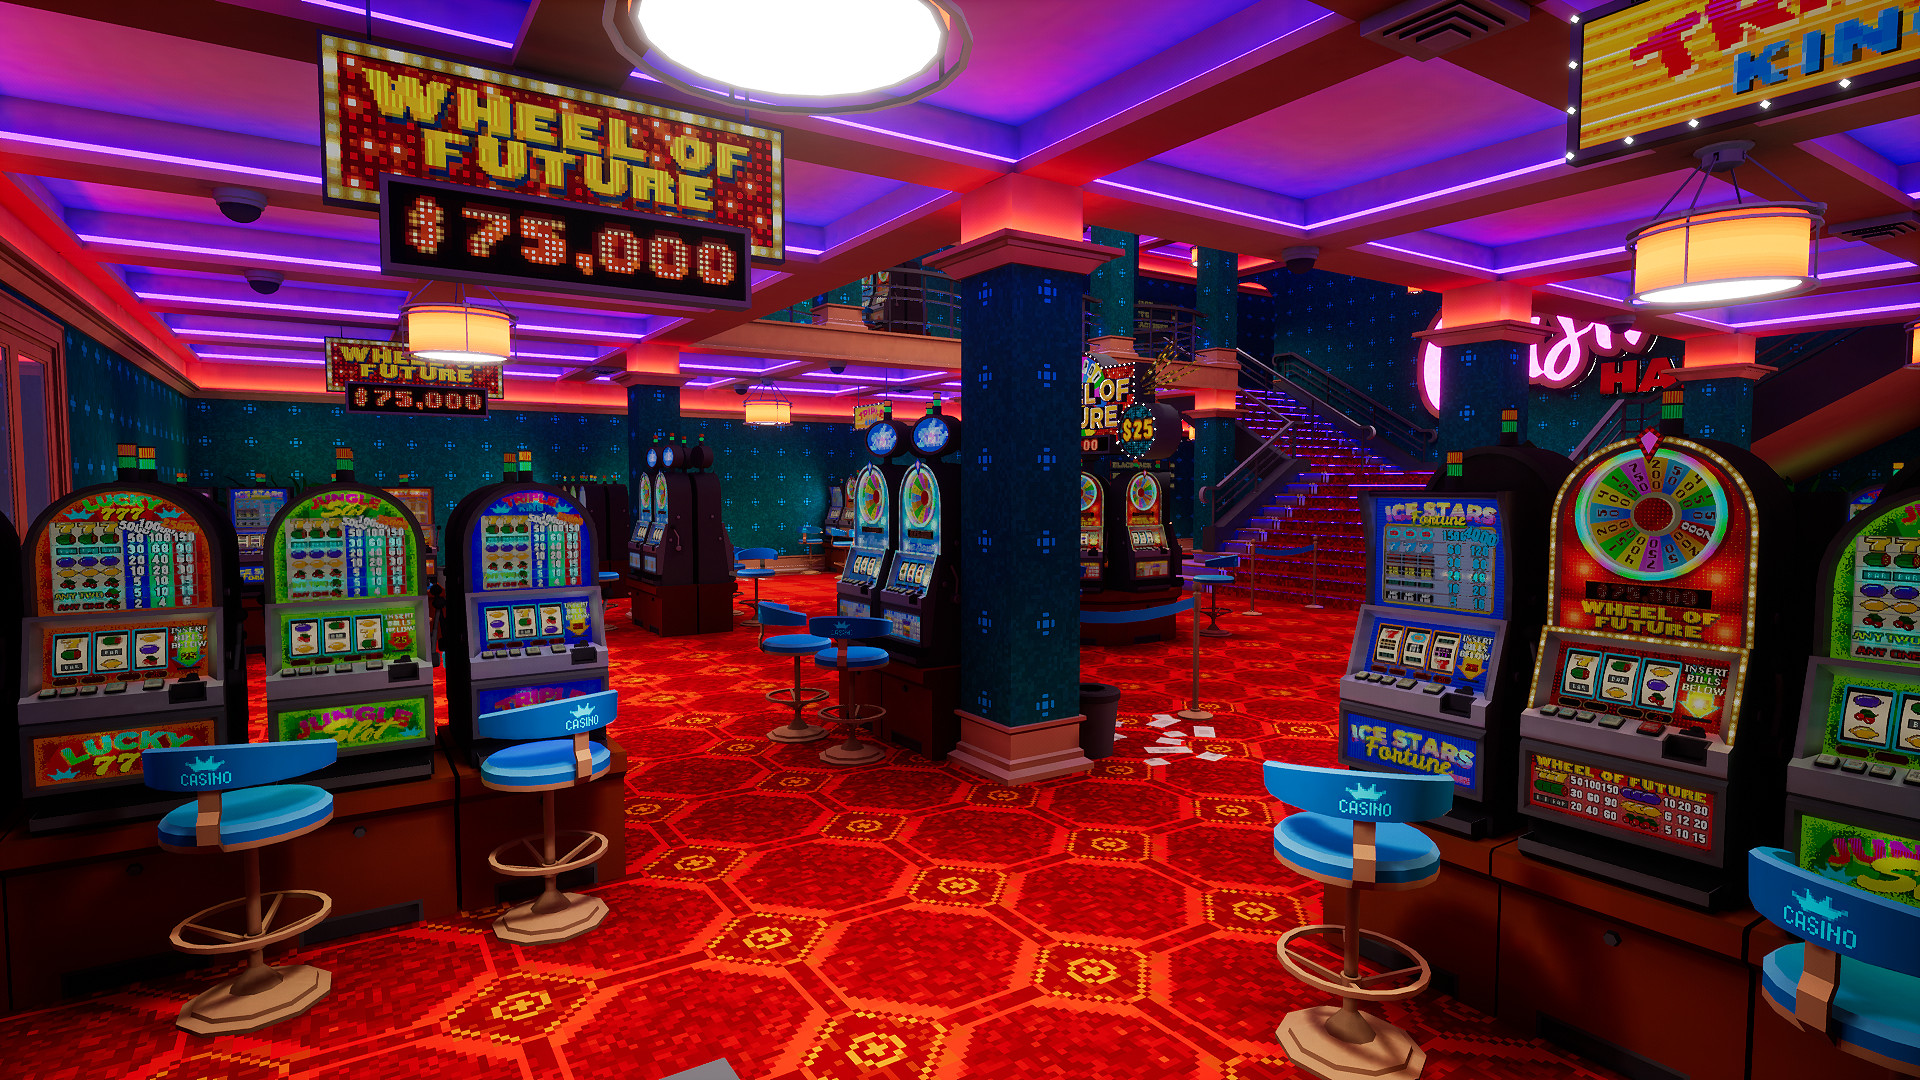 8 Helpful Tips for Playing Slot Machines